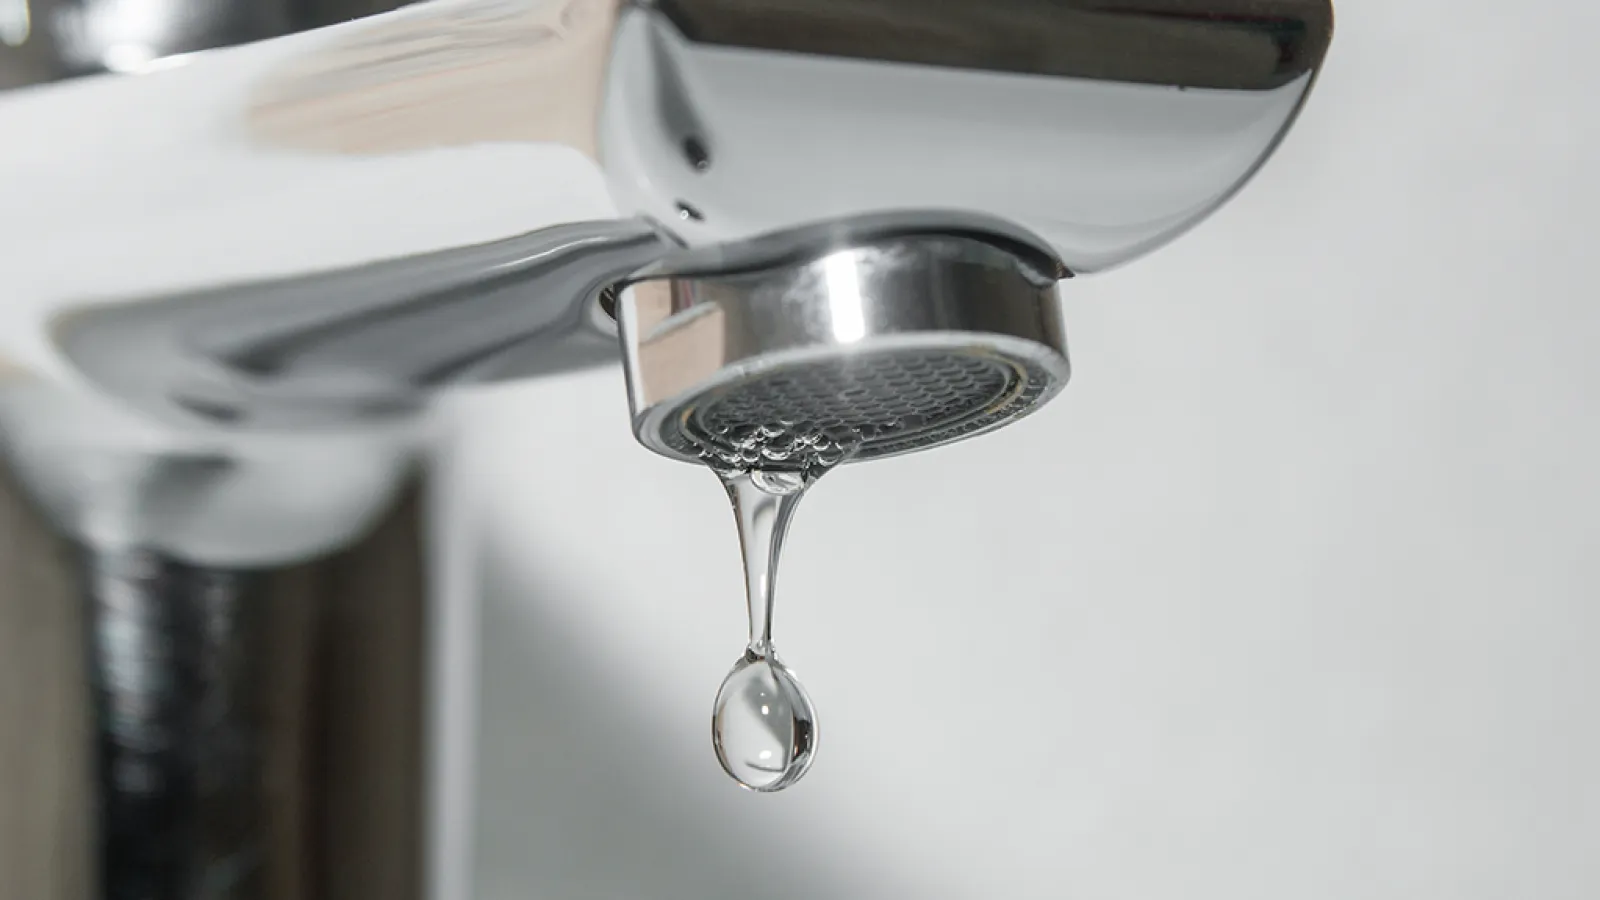 Common Faucet Problems and Solutions